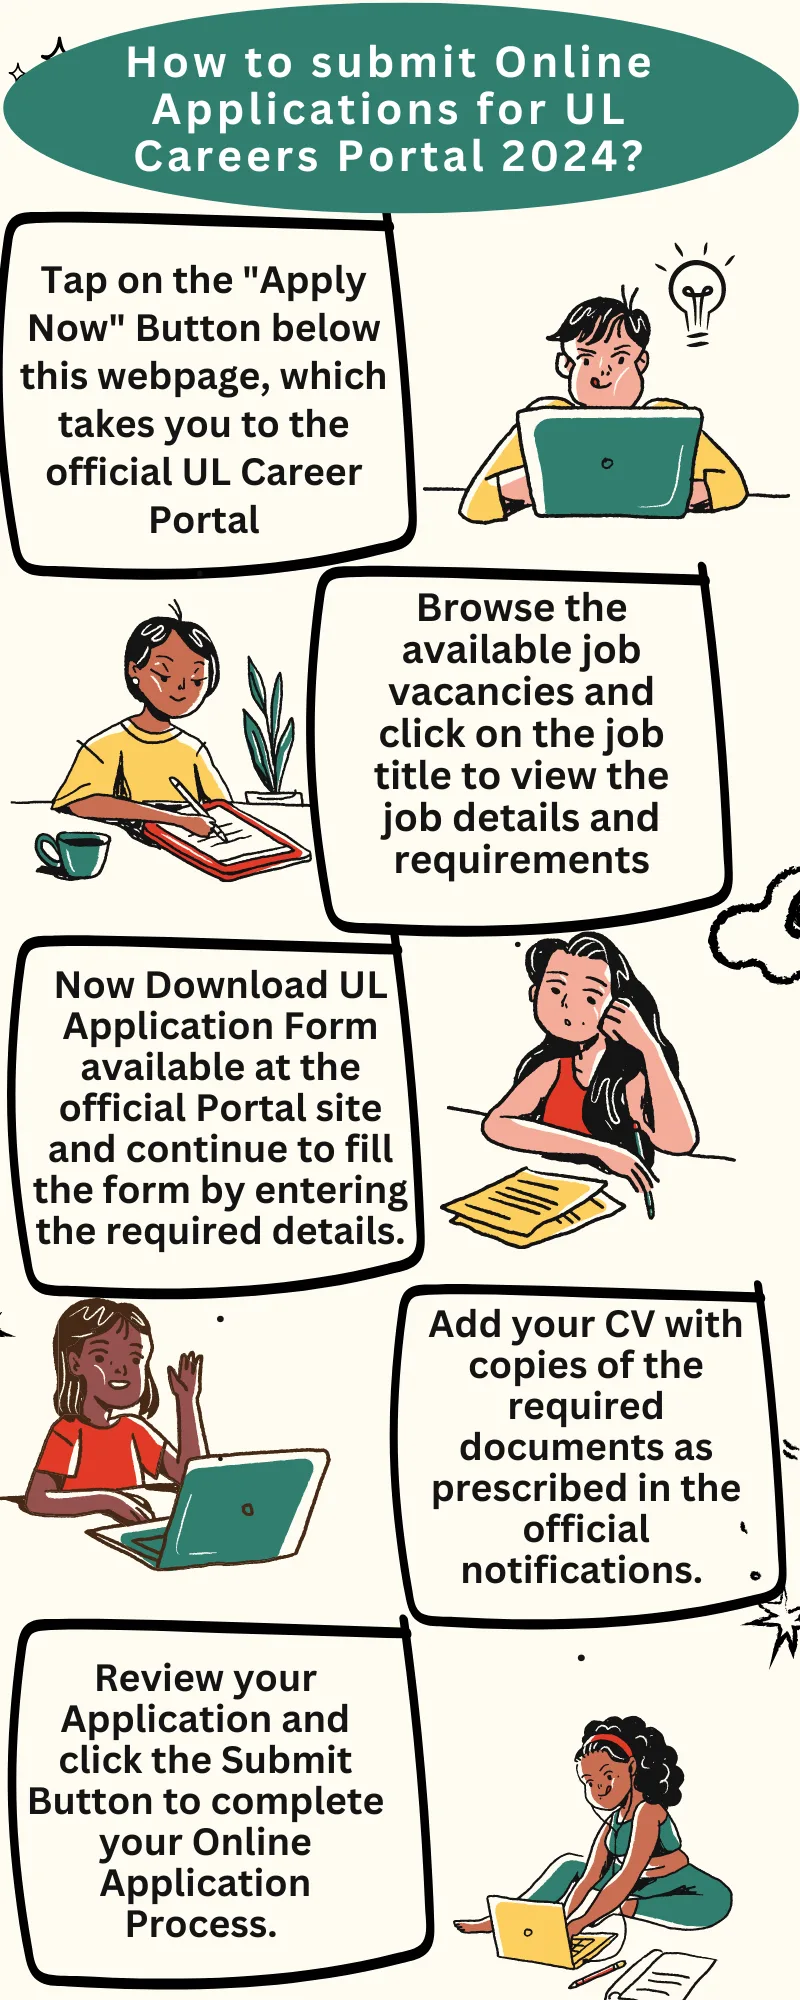 How to submit Online Applications for UL Careers Portal 2024